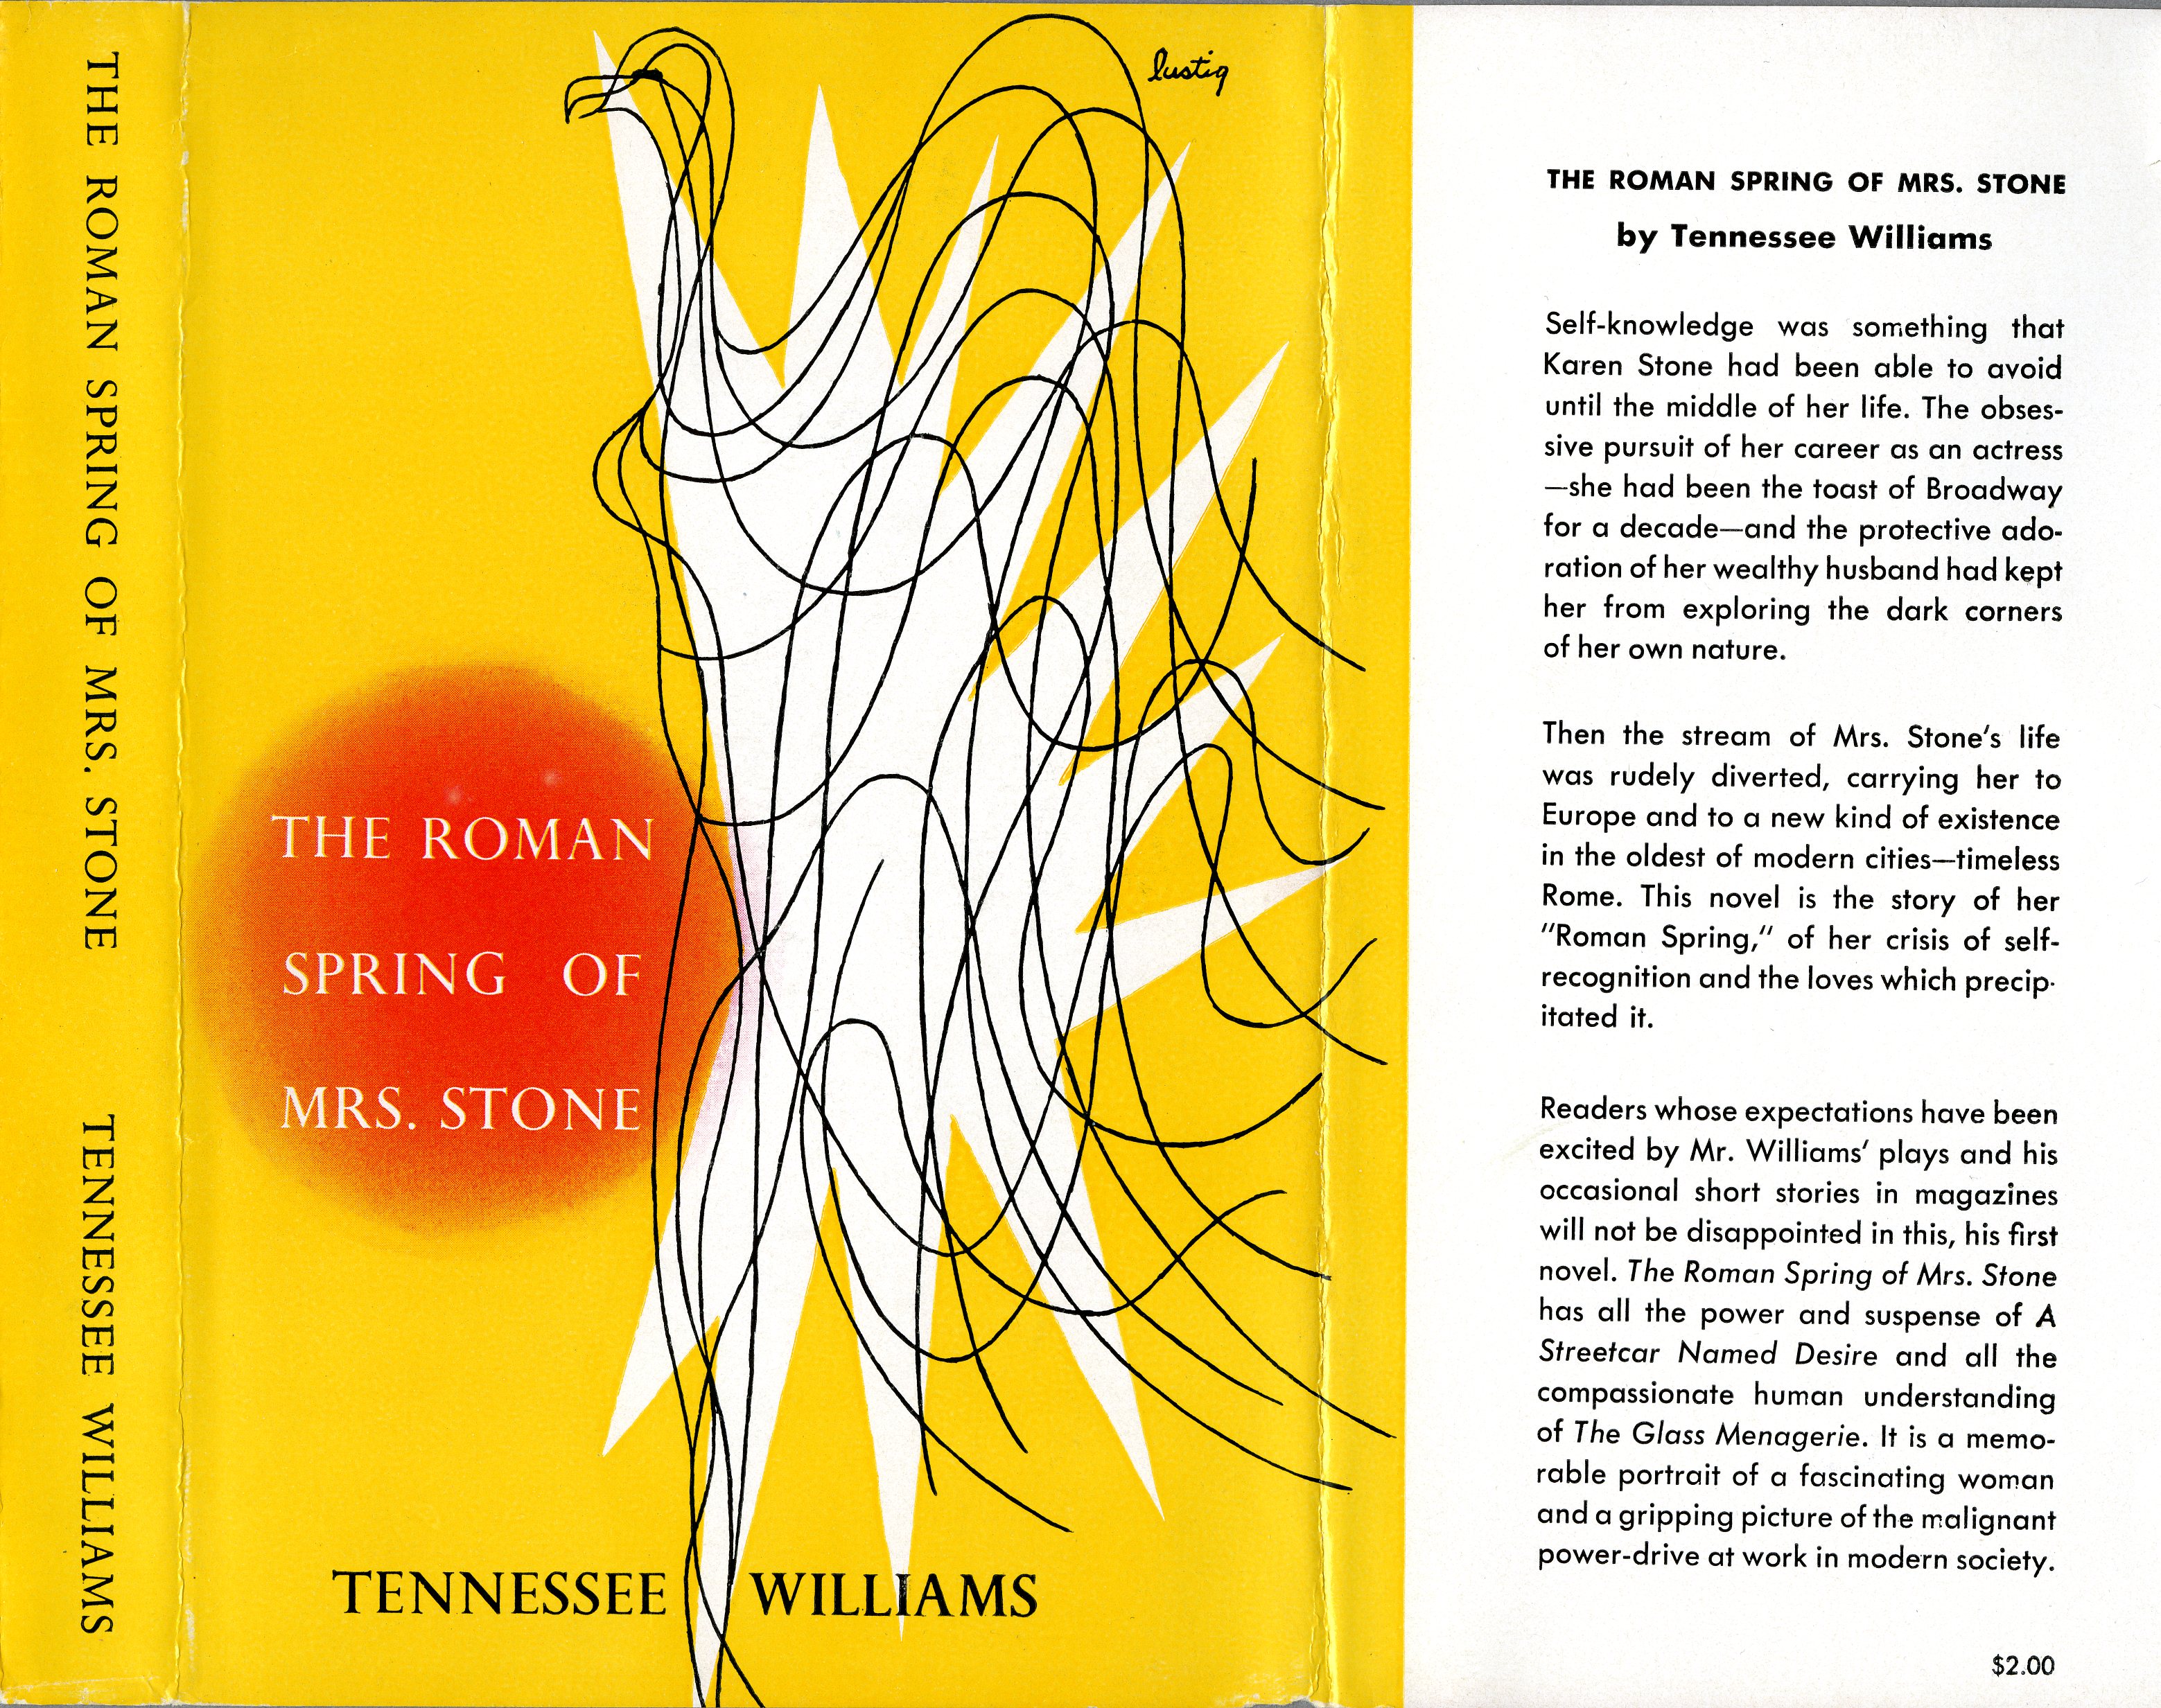 Williams, Tennessee. The Roman Spring of Mrs. Stone. First edition. New York: New Directions, 1950. Cover art and design by Alvin Lustig.